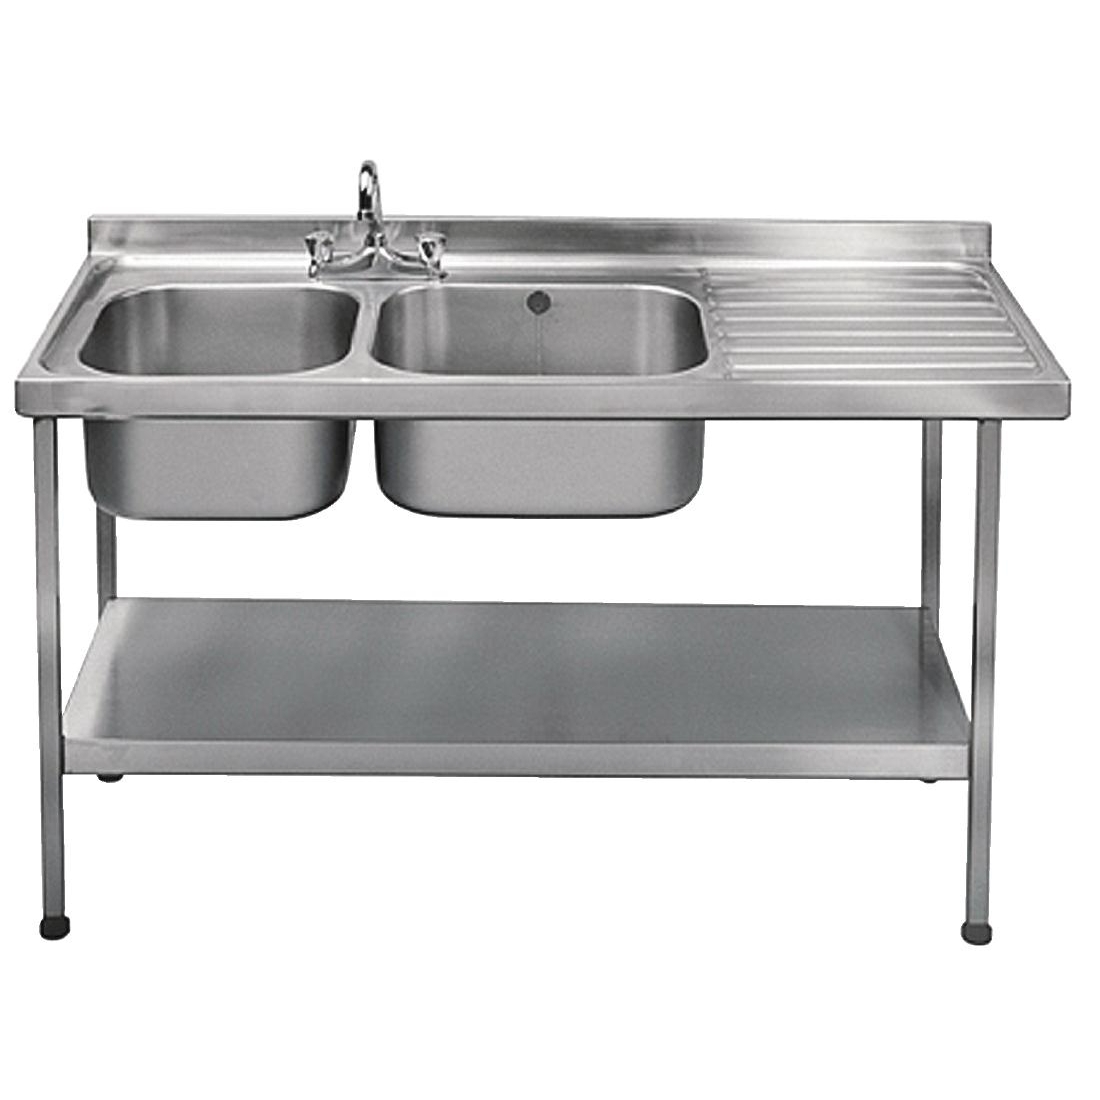 Franke Sissons Self Assembly Stainless Steel Double Sink Right Hand Drainer 1500x600mm